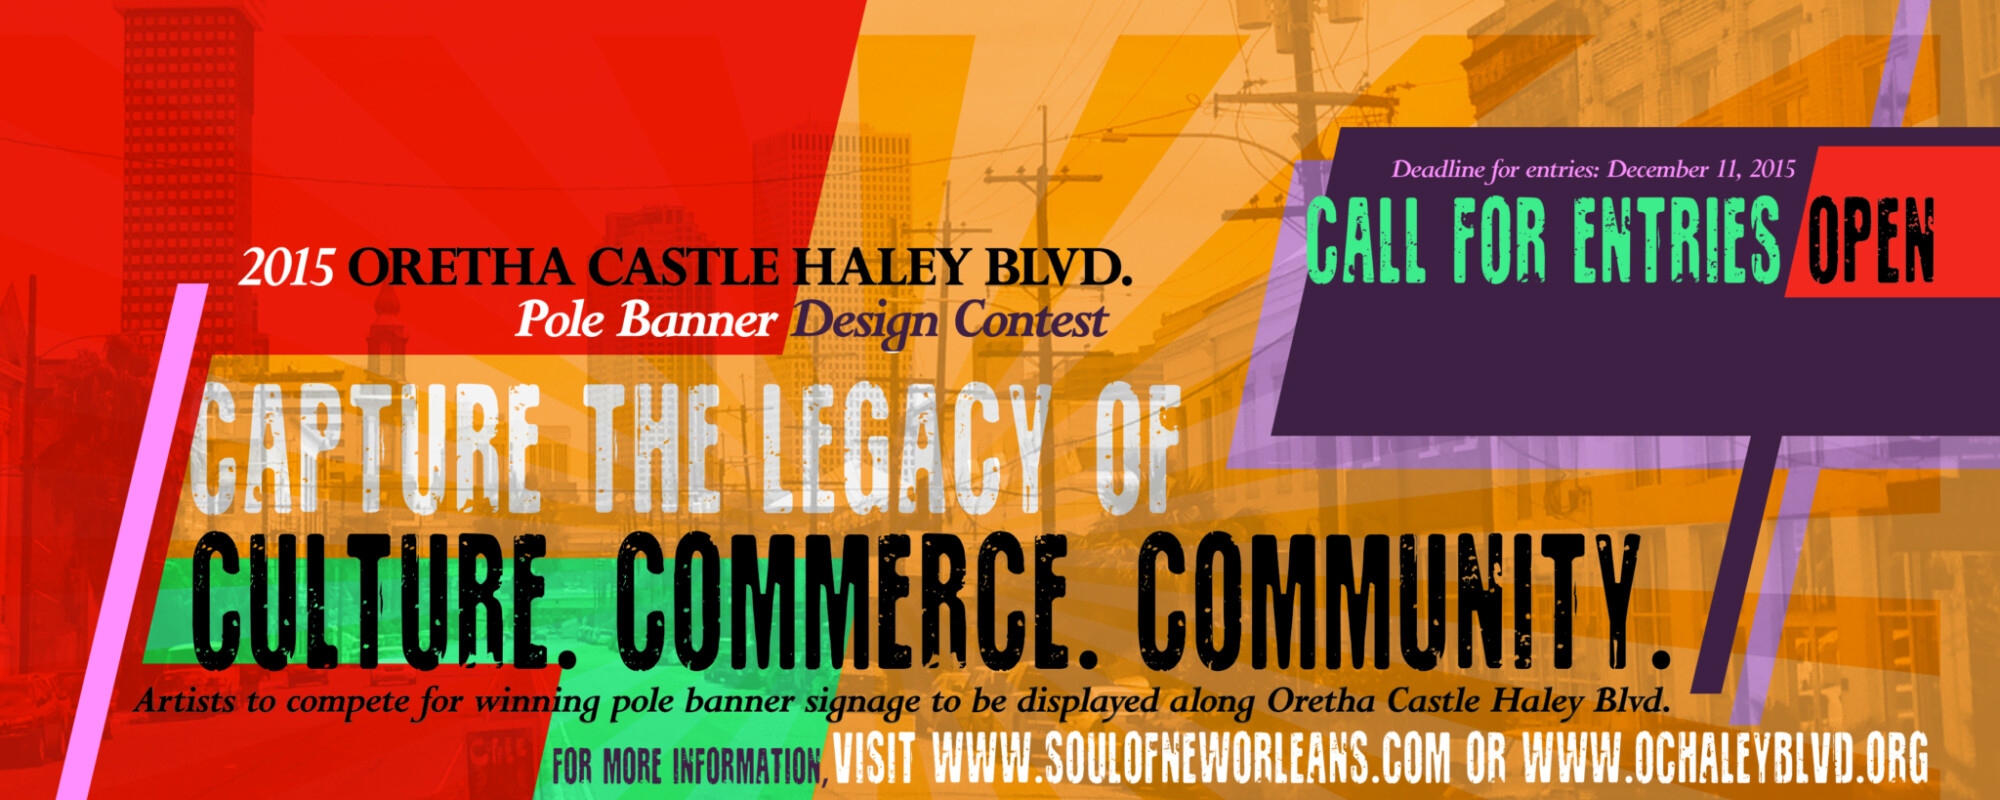 Brightly colored graphic promoting the call for entries for the 2015 Oretha Castle Haley Blvd. pole banner design contest.